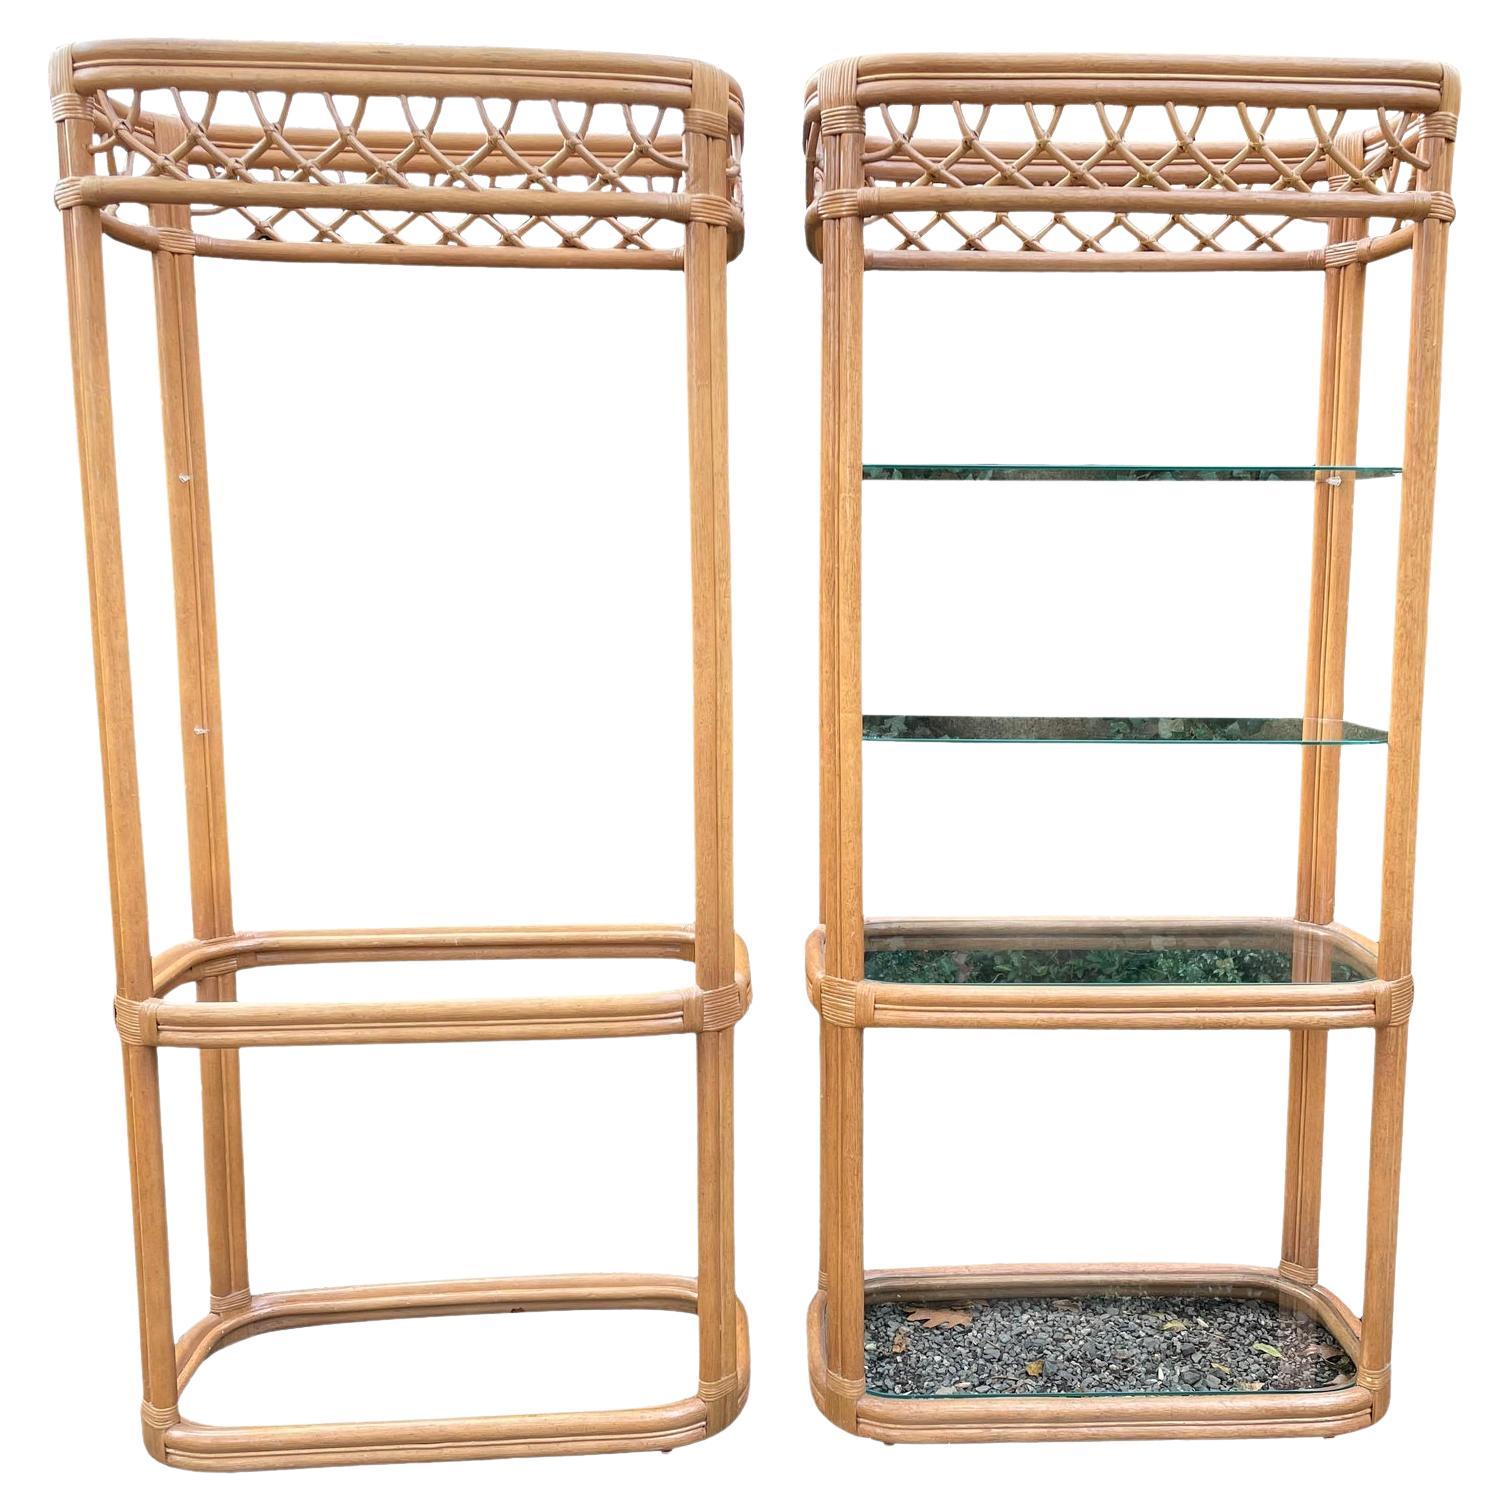 Pair of Stunning Wrapped Bamboo and Glass Bookshelves Etageres